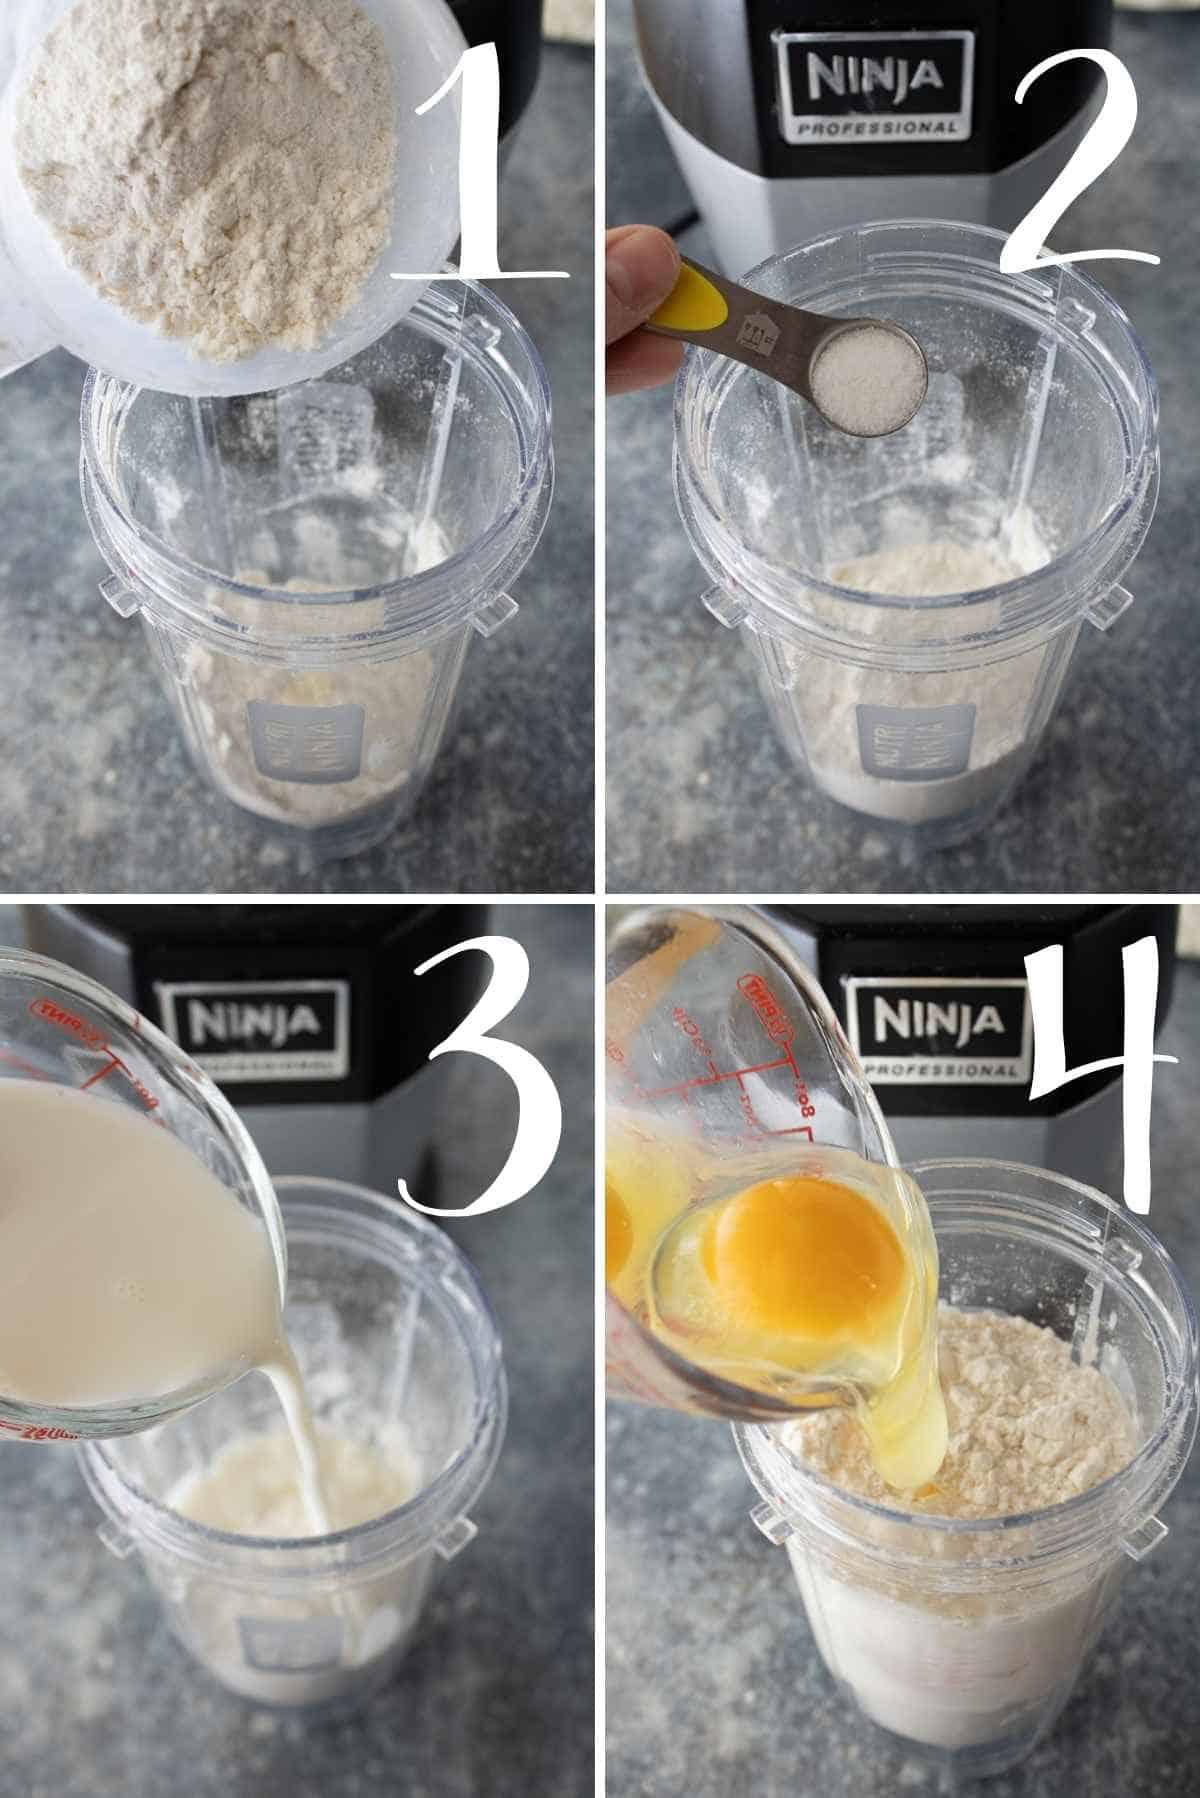 Flour, salt, milk and eggs added to the blender cup.